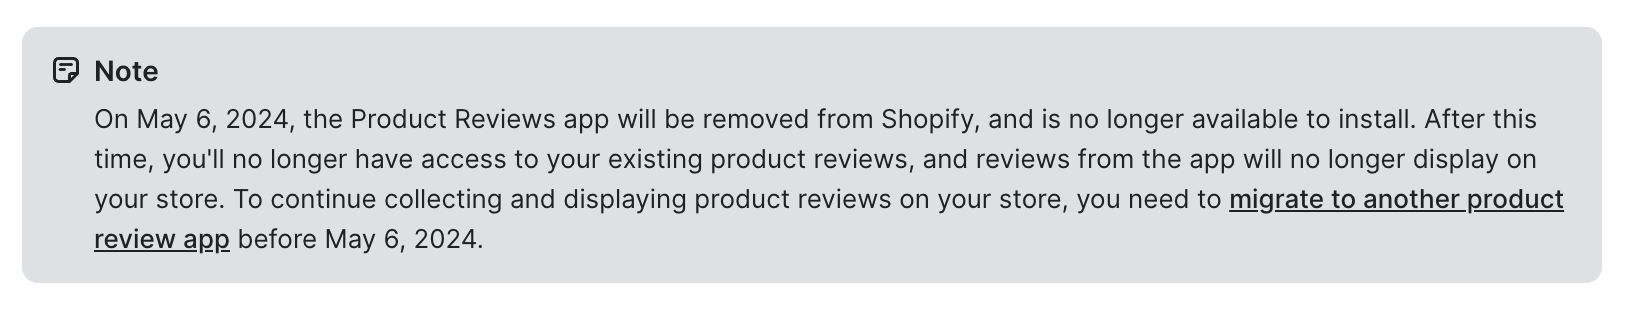 Details from Shopify's site on the deprecation of the Product Reviews App